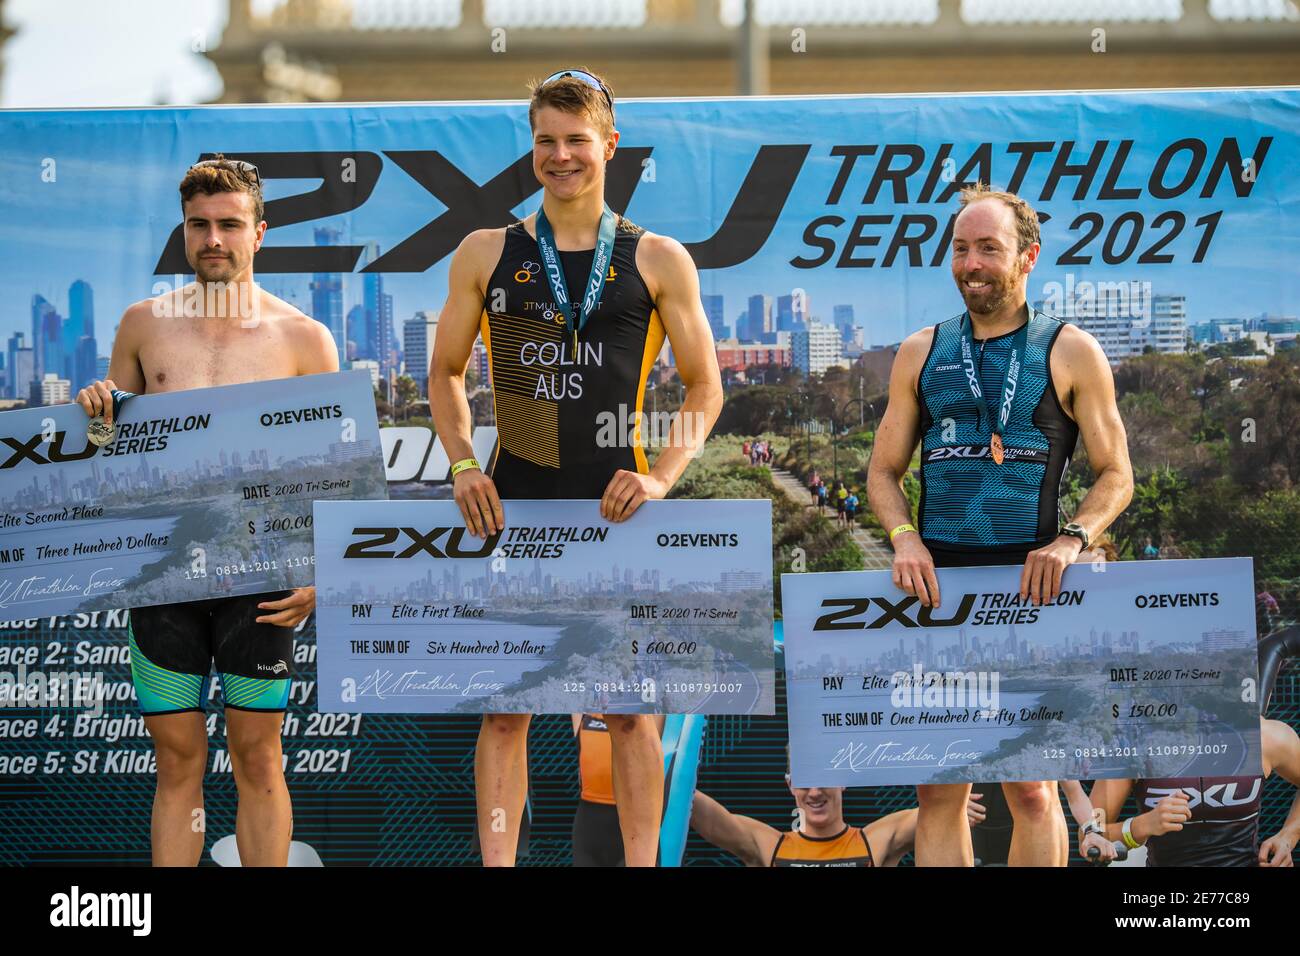 Melbourne, Australia. 17th Jan, 2021. Elite Men's race winners seen on the  podium with medals and prizes (L-R) Cassidy Shaw, Yoann Colin and Jeremy  Drake during the 2XU Triathlon Series 2021, Race